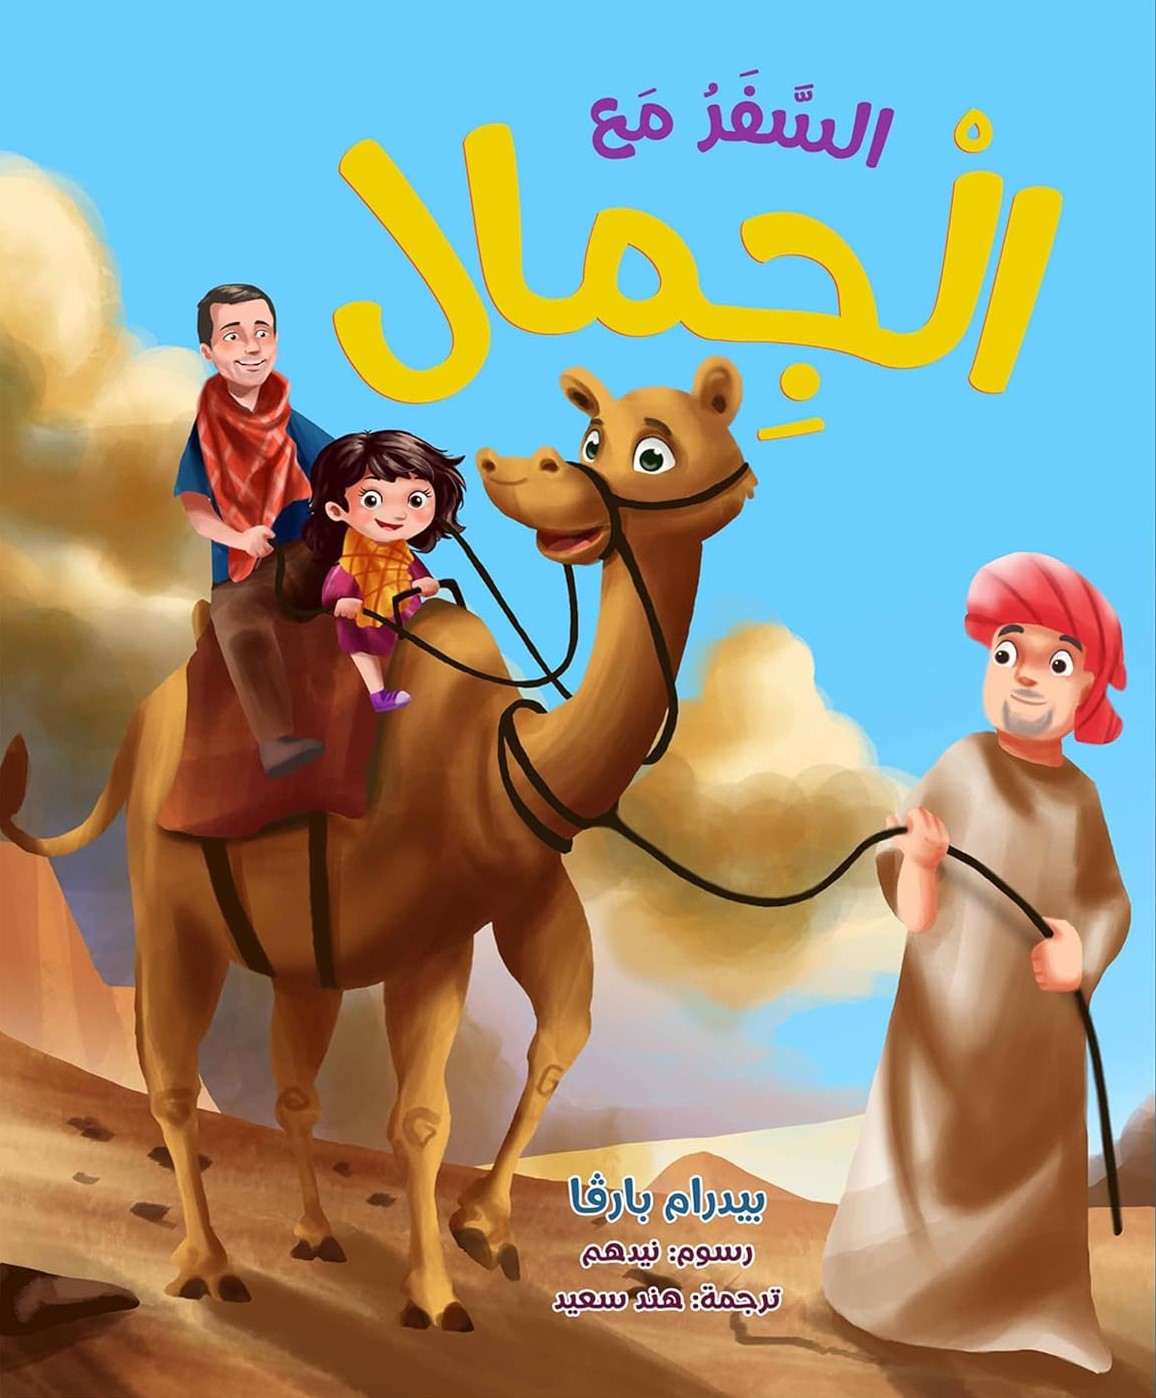 Traveling With Camels - Arabic Edition